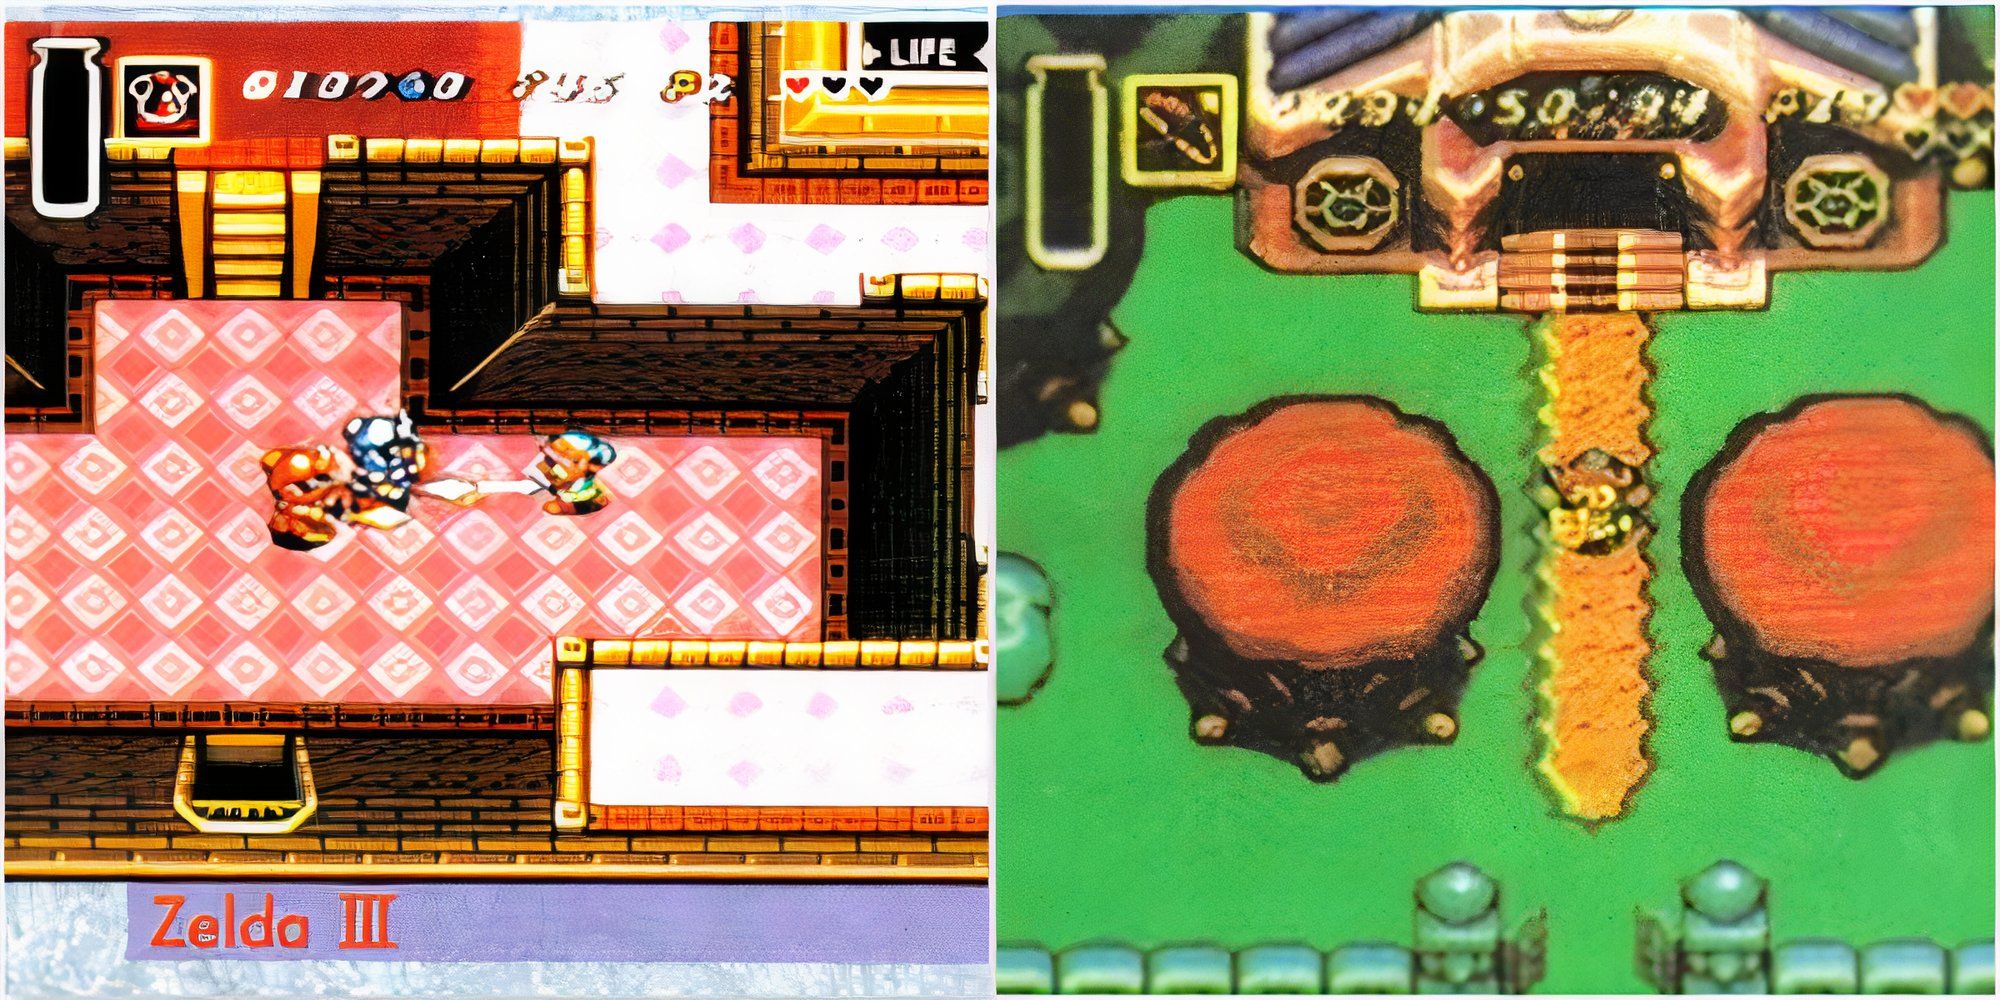 Early beta footage of The Legend of Zelda A Link to the Past